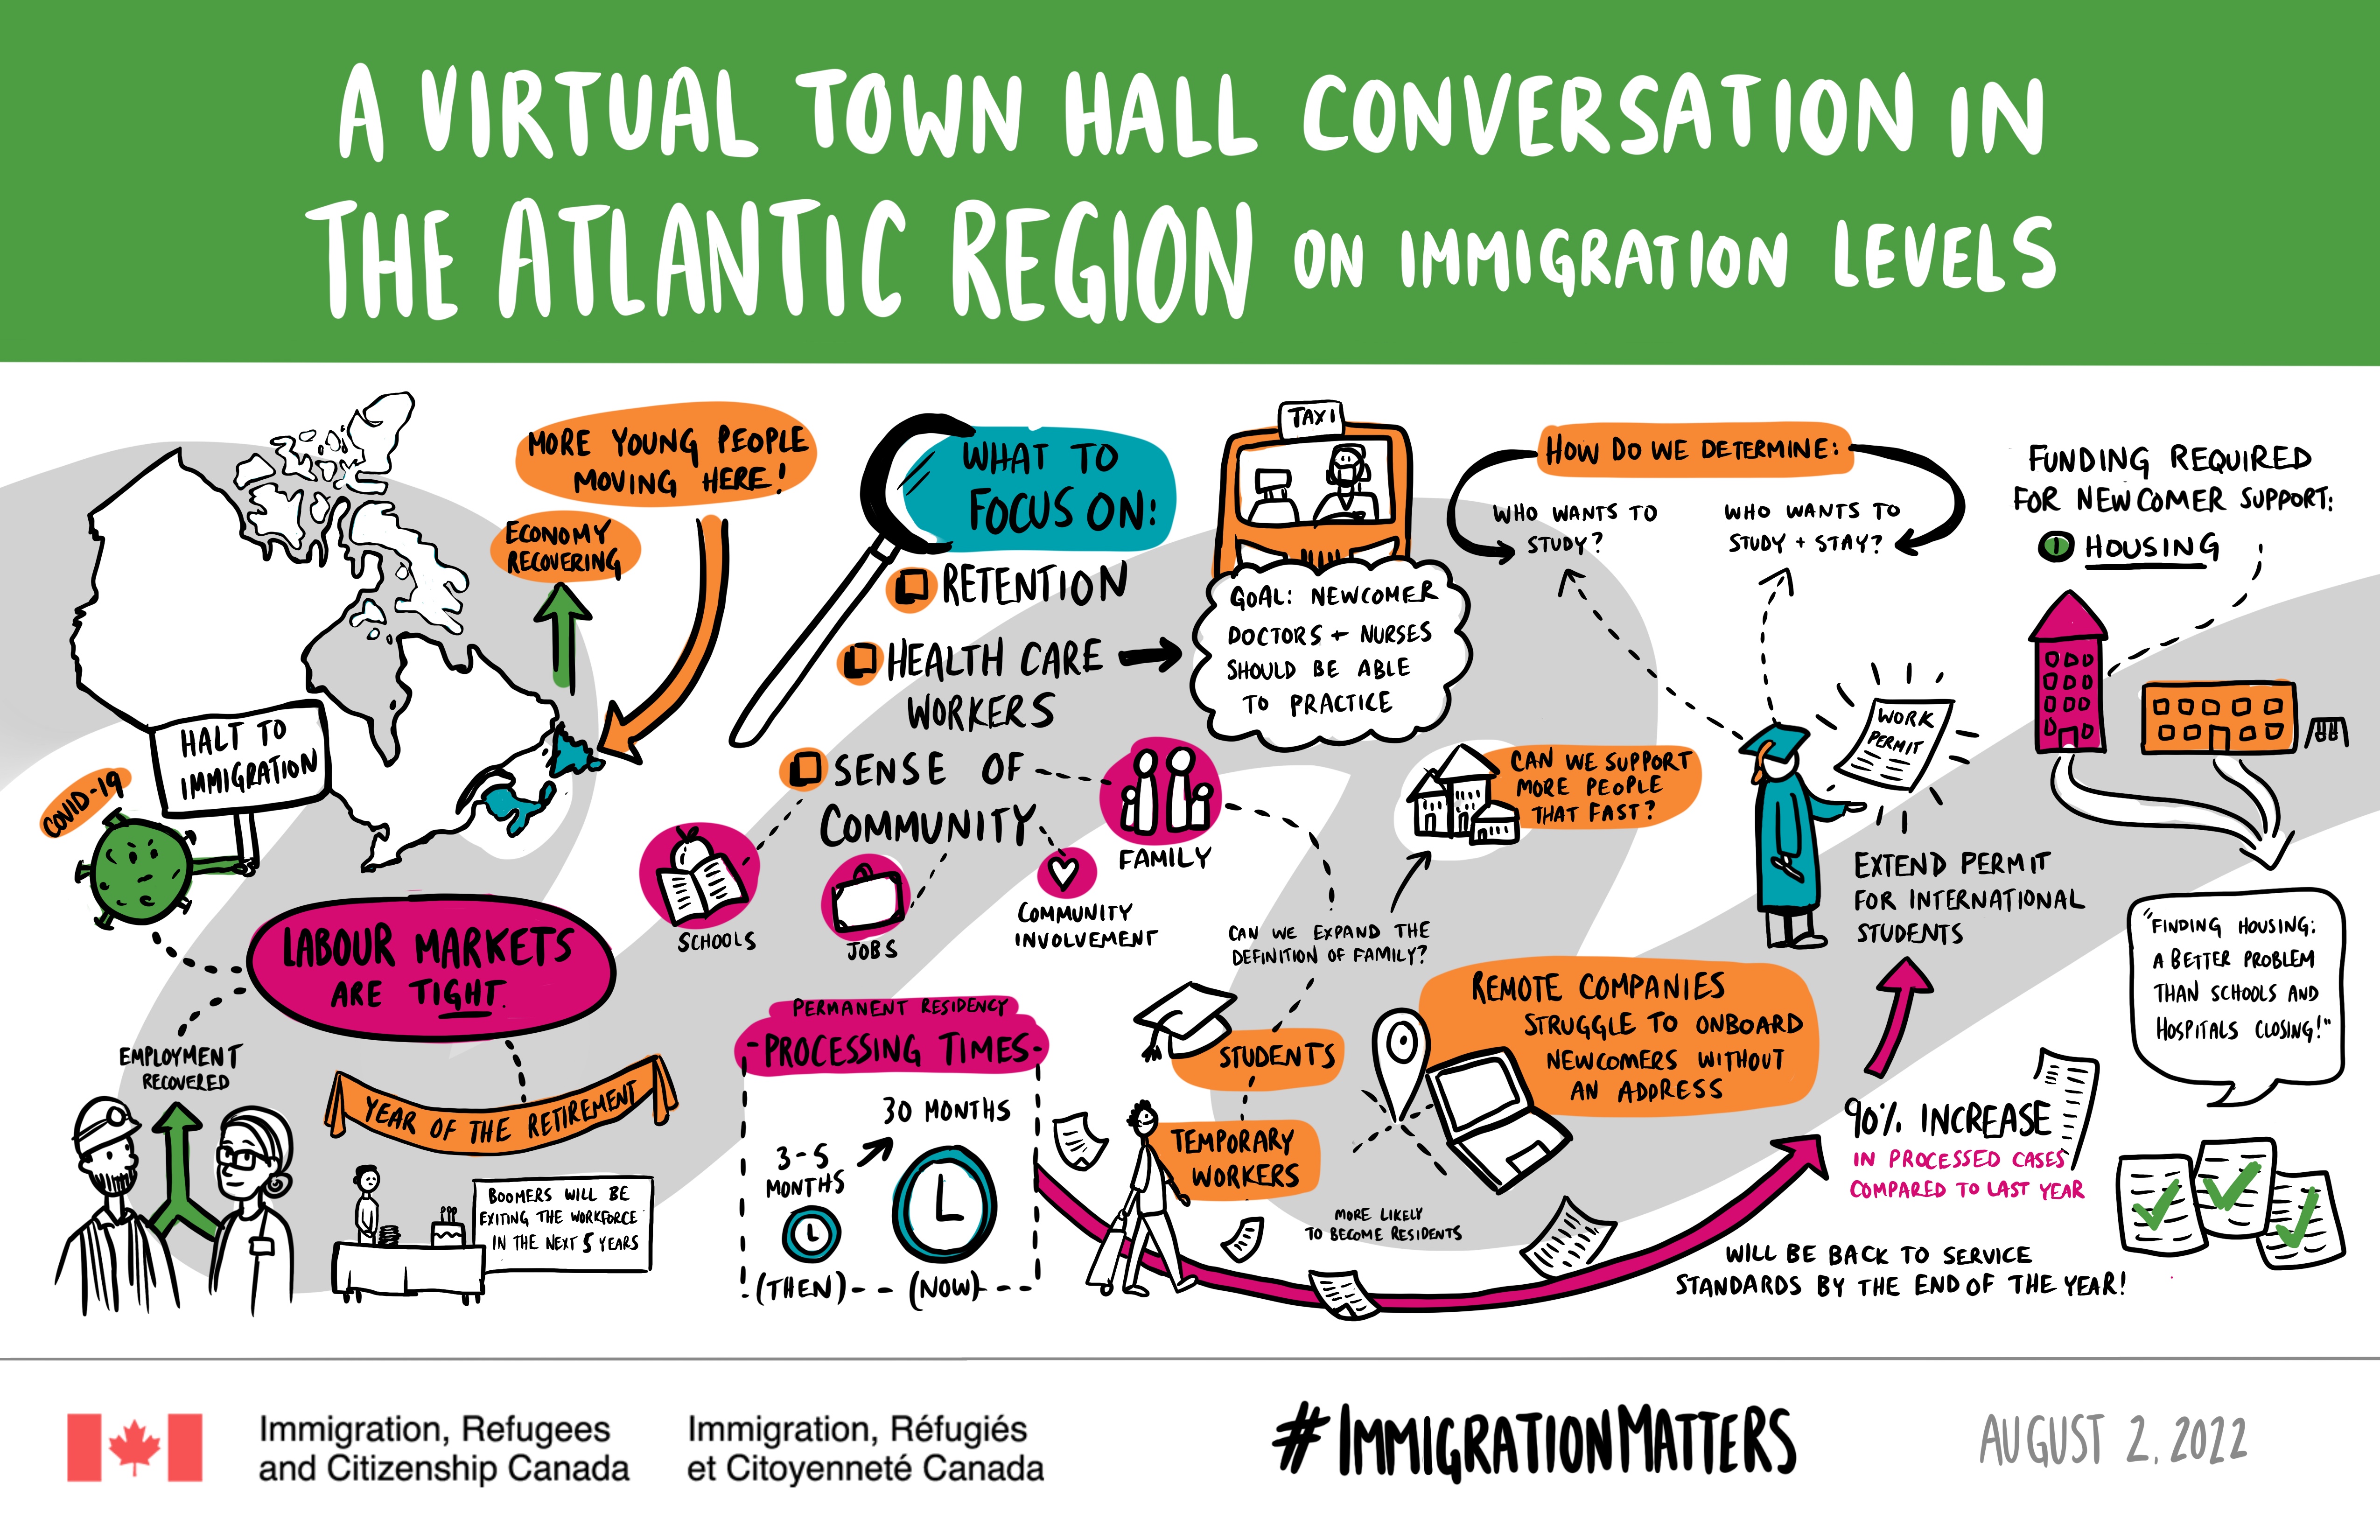 A virtual town hall conversation in the Atlantic region on immigration levels